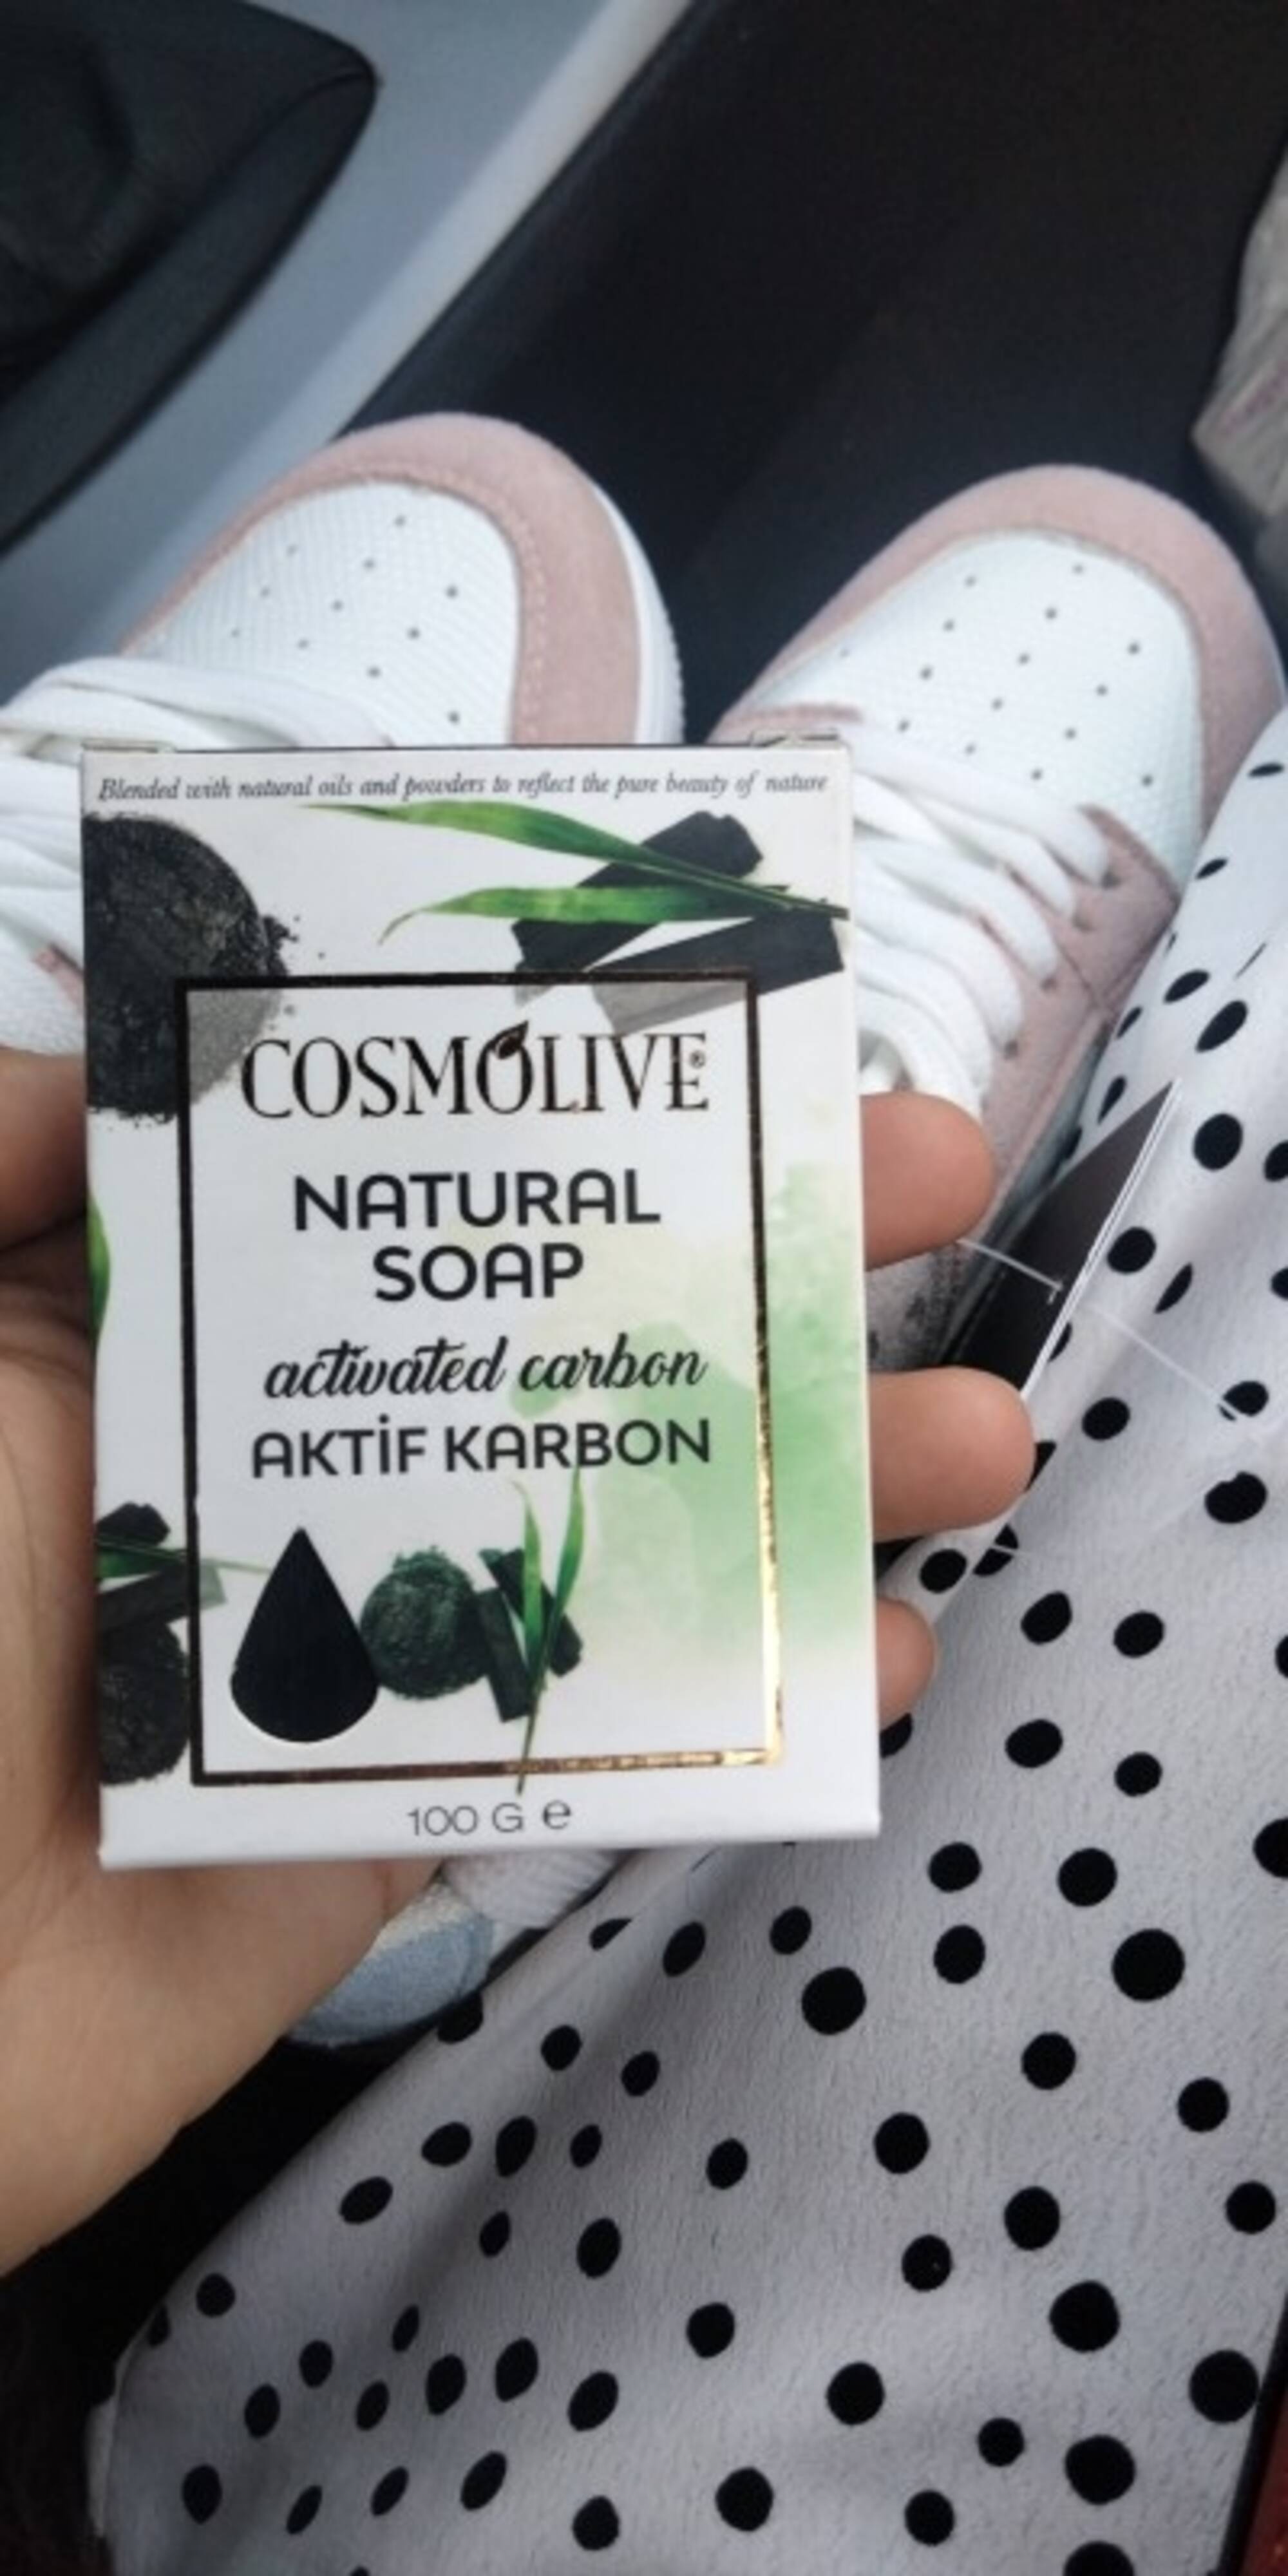 COSMOLIVE - Activated carbon - Natural soap